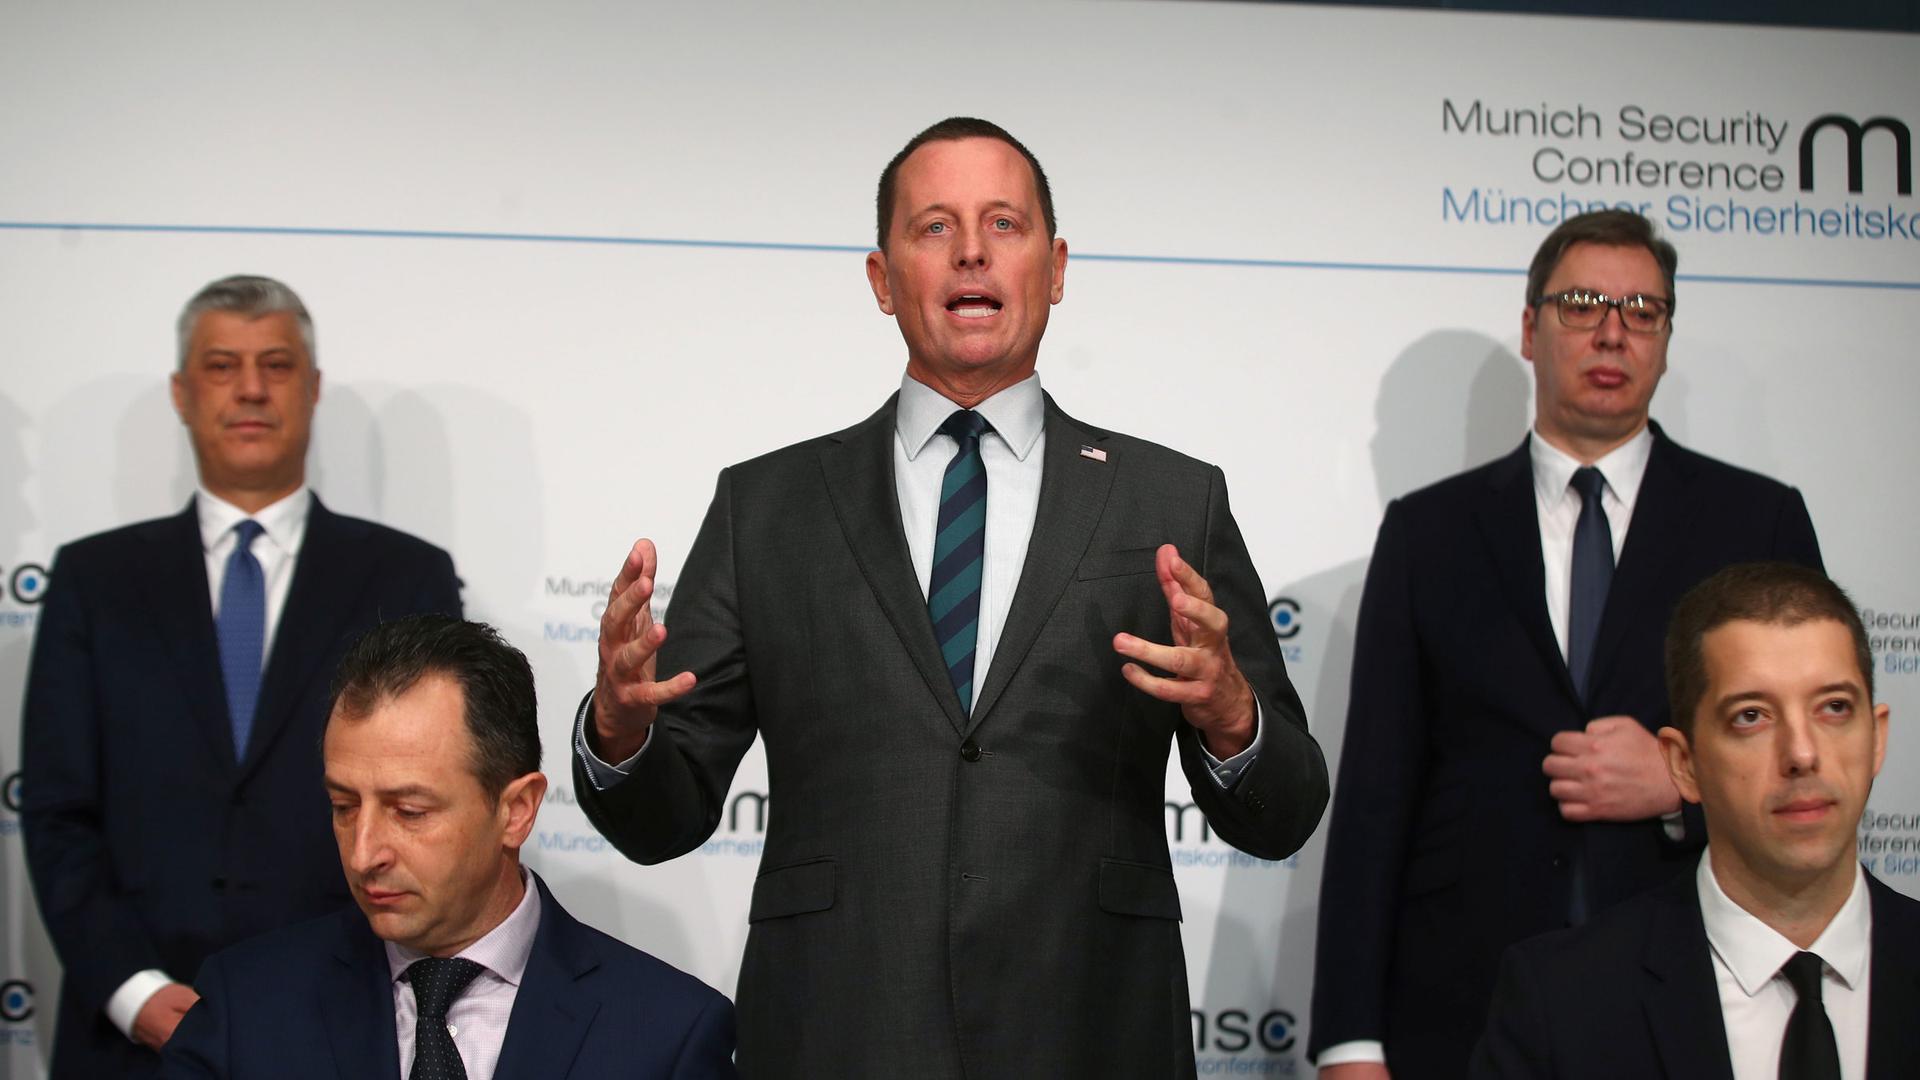 US ambassador to Germany Richard Grenell, Kosovo's President Hashim Thaci and Serbia's President Aleksandar Vucic attend the Munich Security Conference in Munich, Germany, Feb.14, 2020.